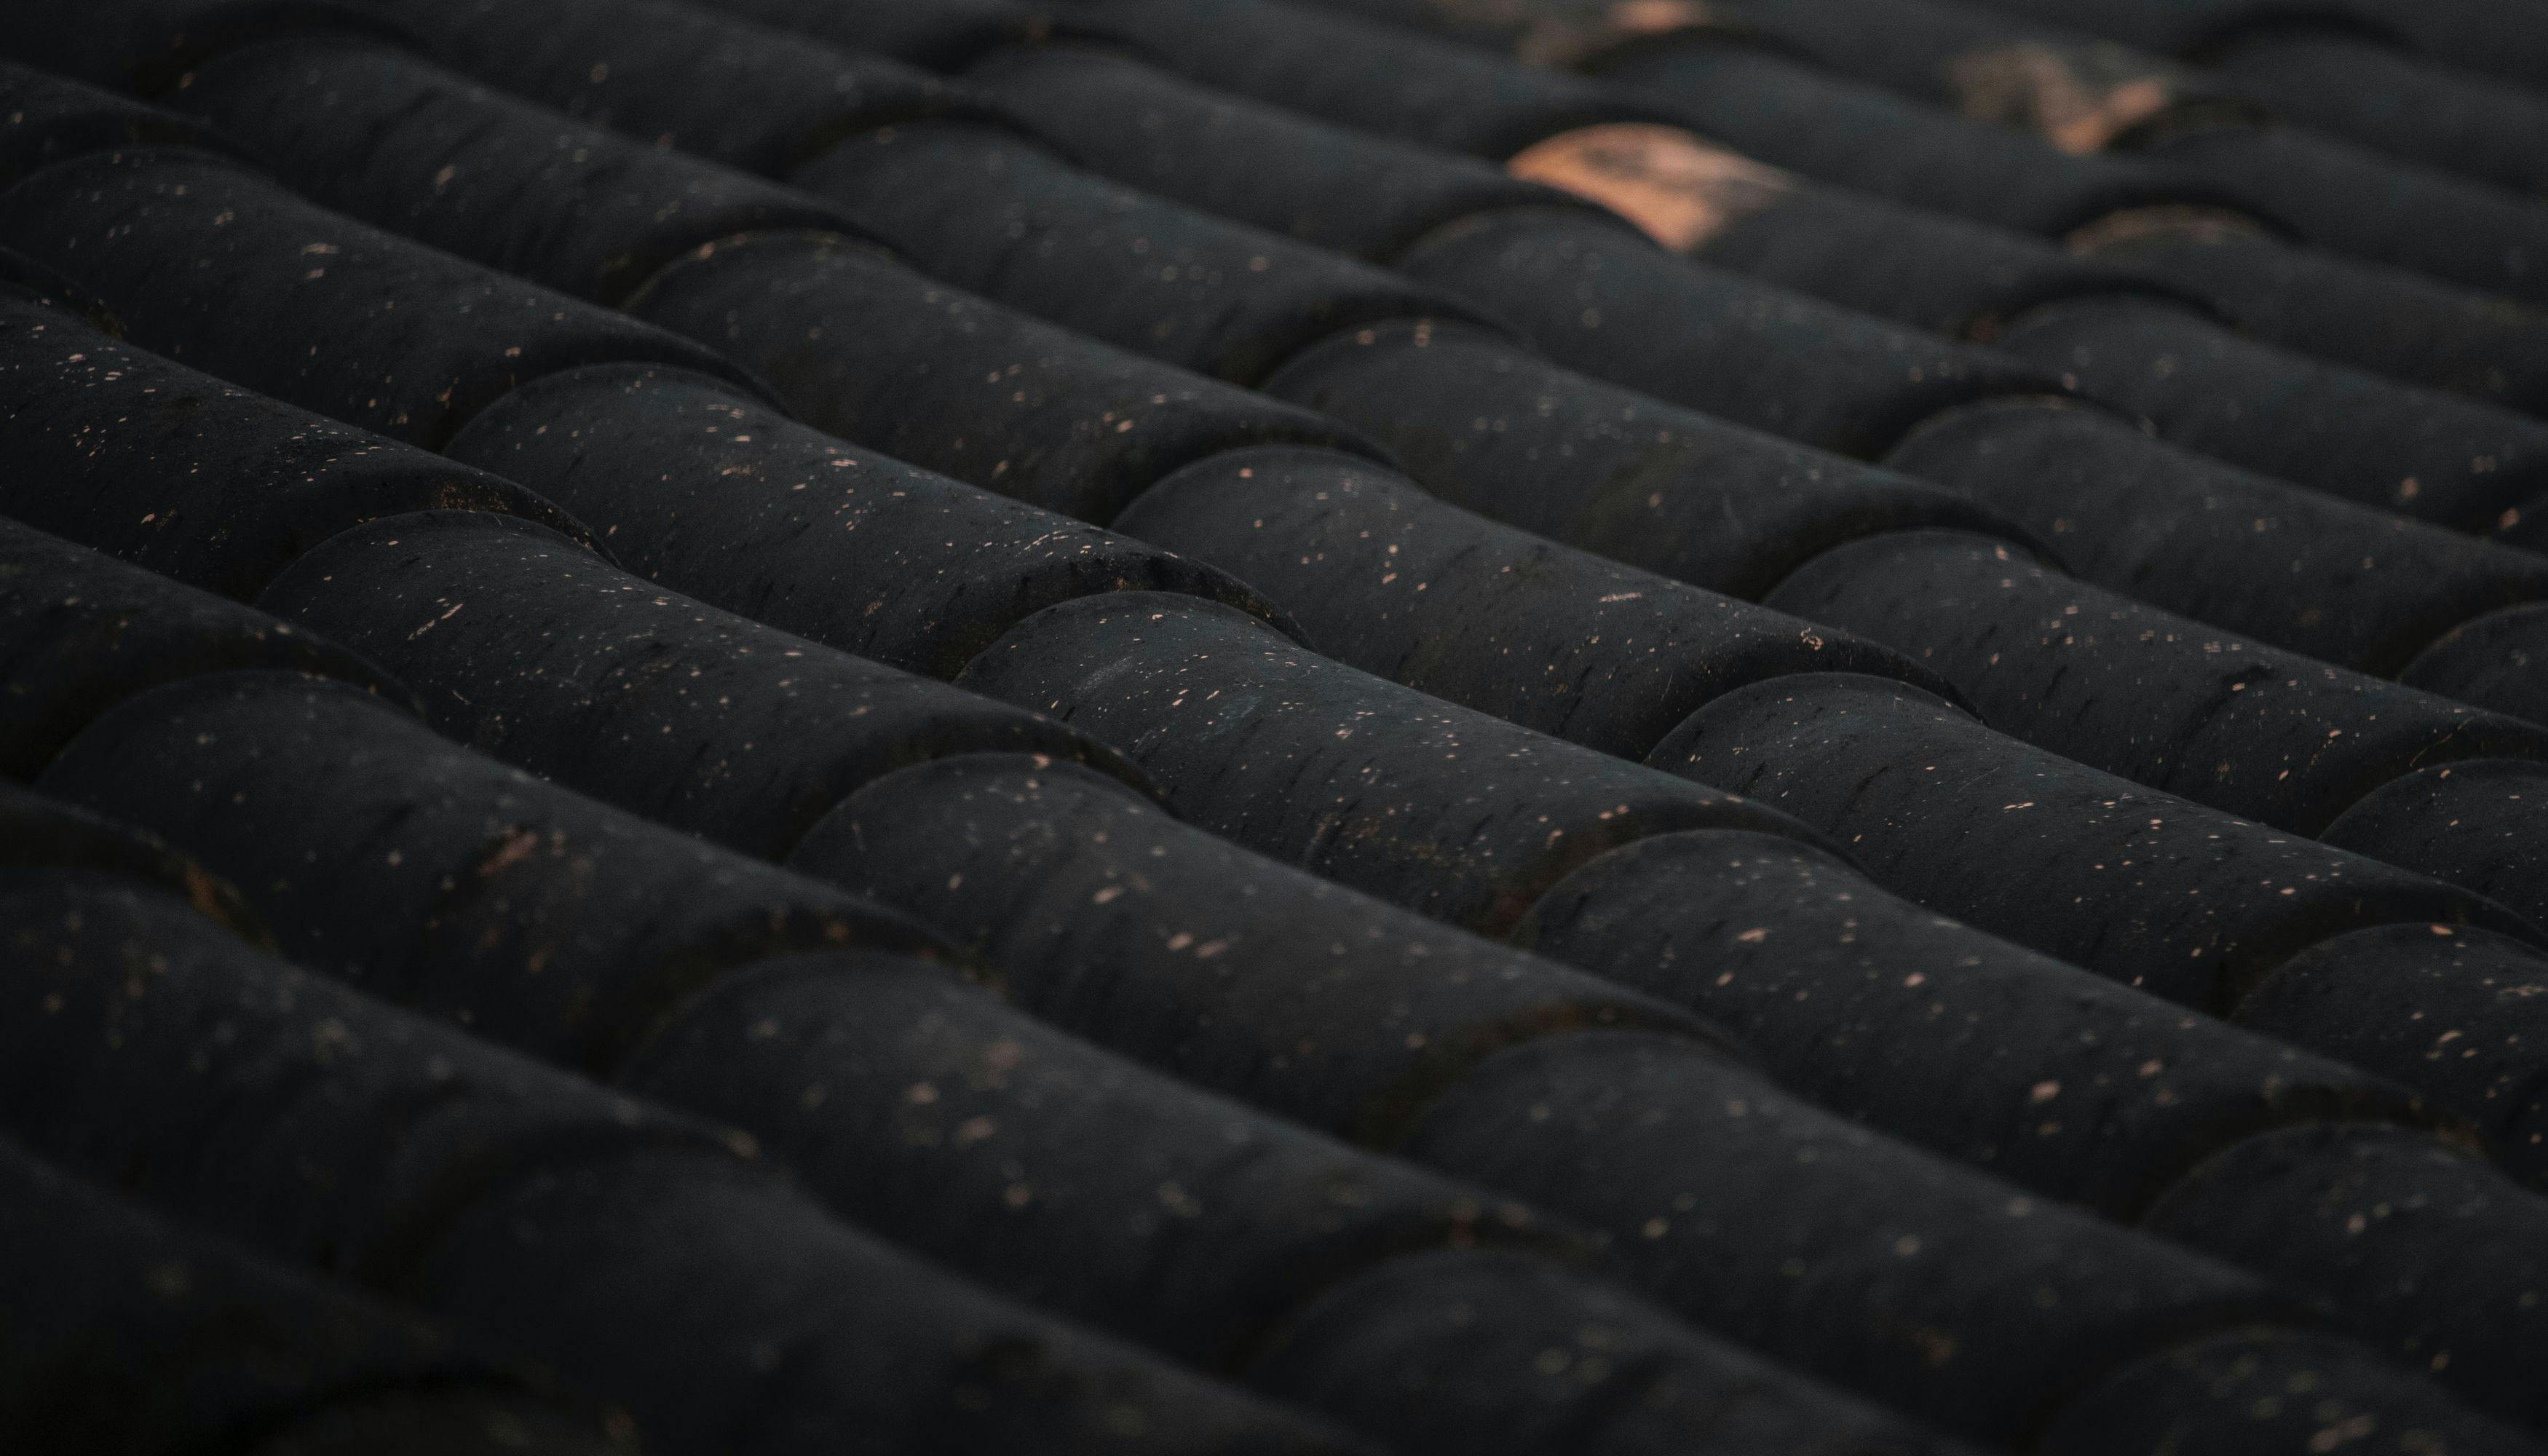 Close-up of a black roof with various tiles, some missing.